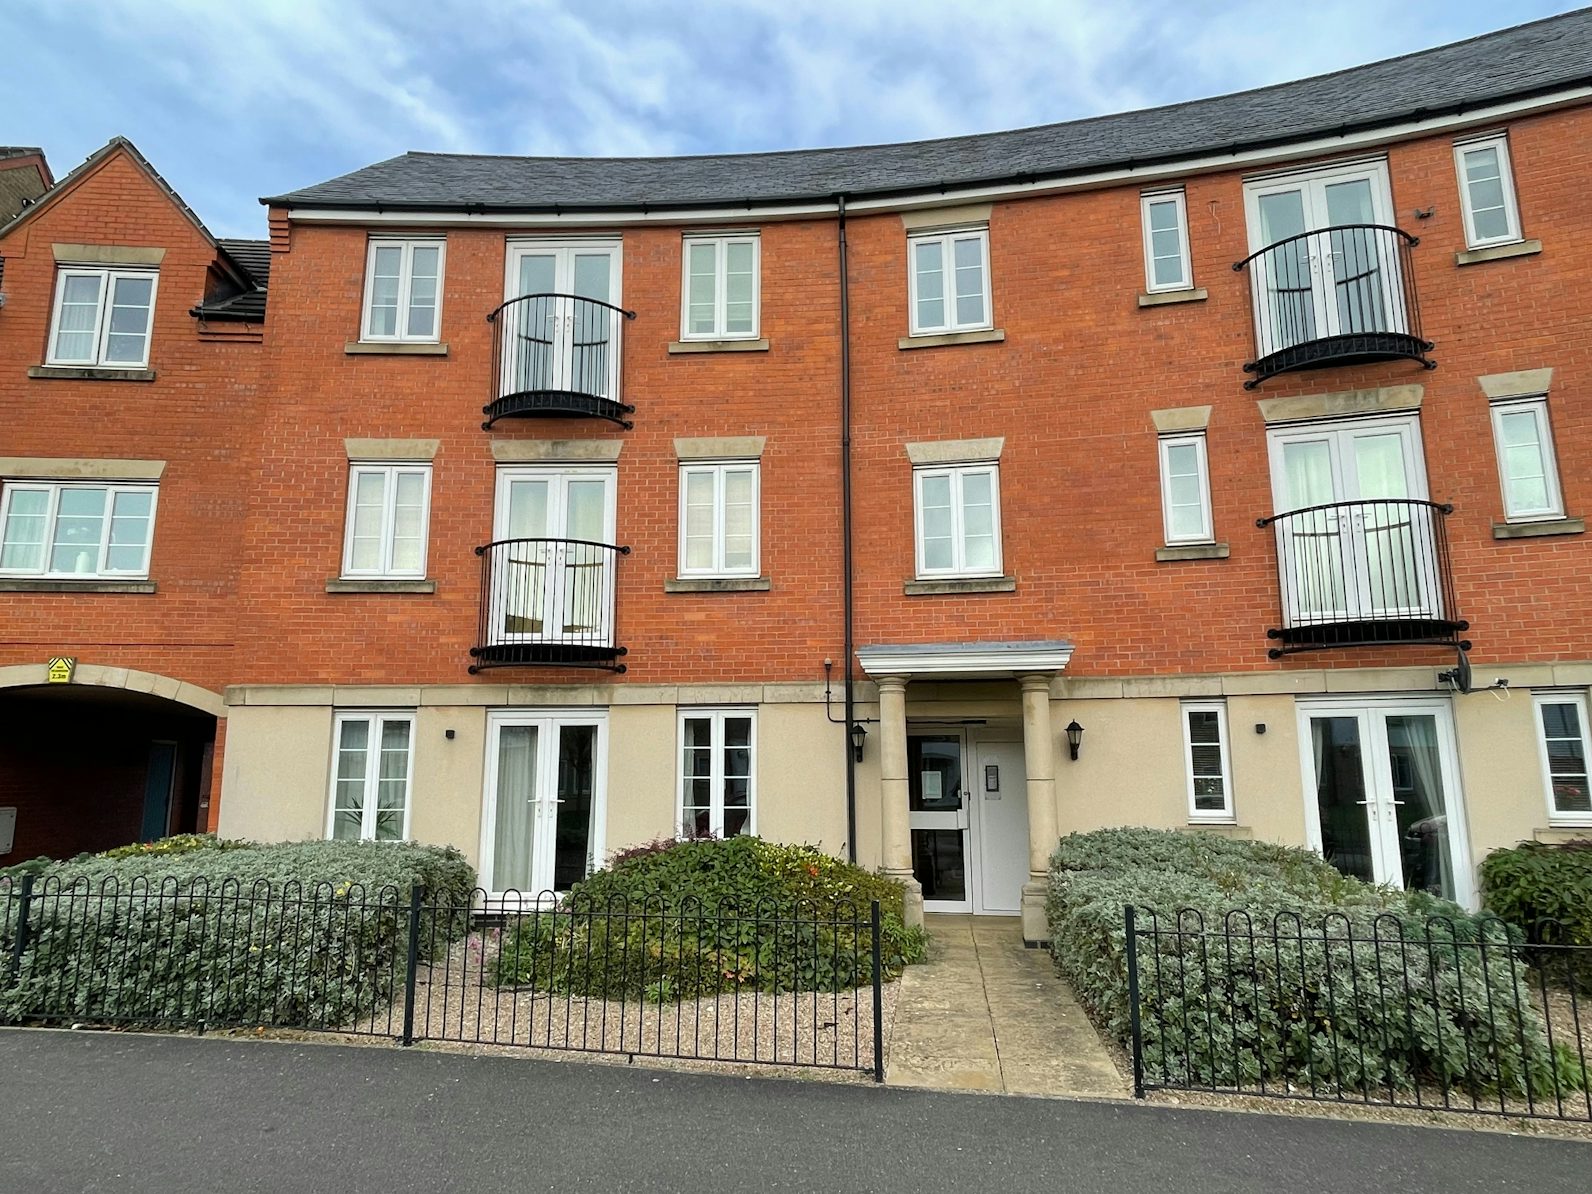 Flat to rent on Venables Way Bunkers Hill, Lincoln, LN2